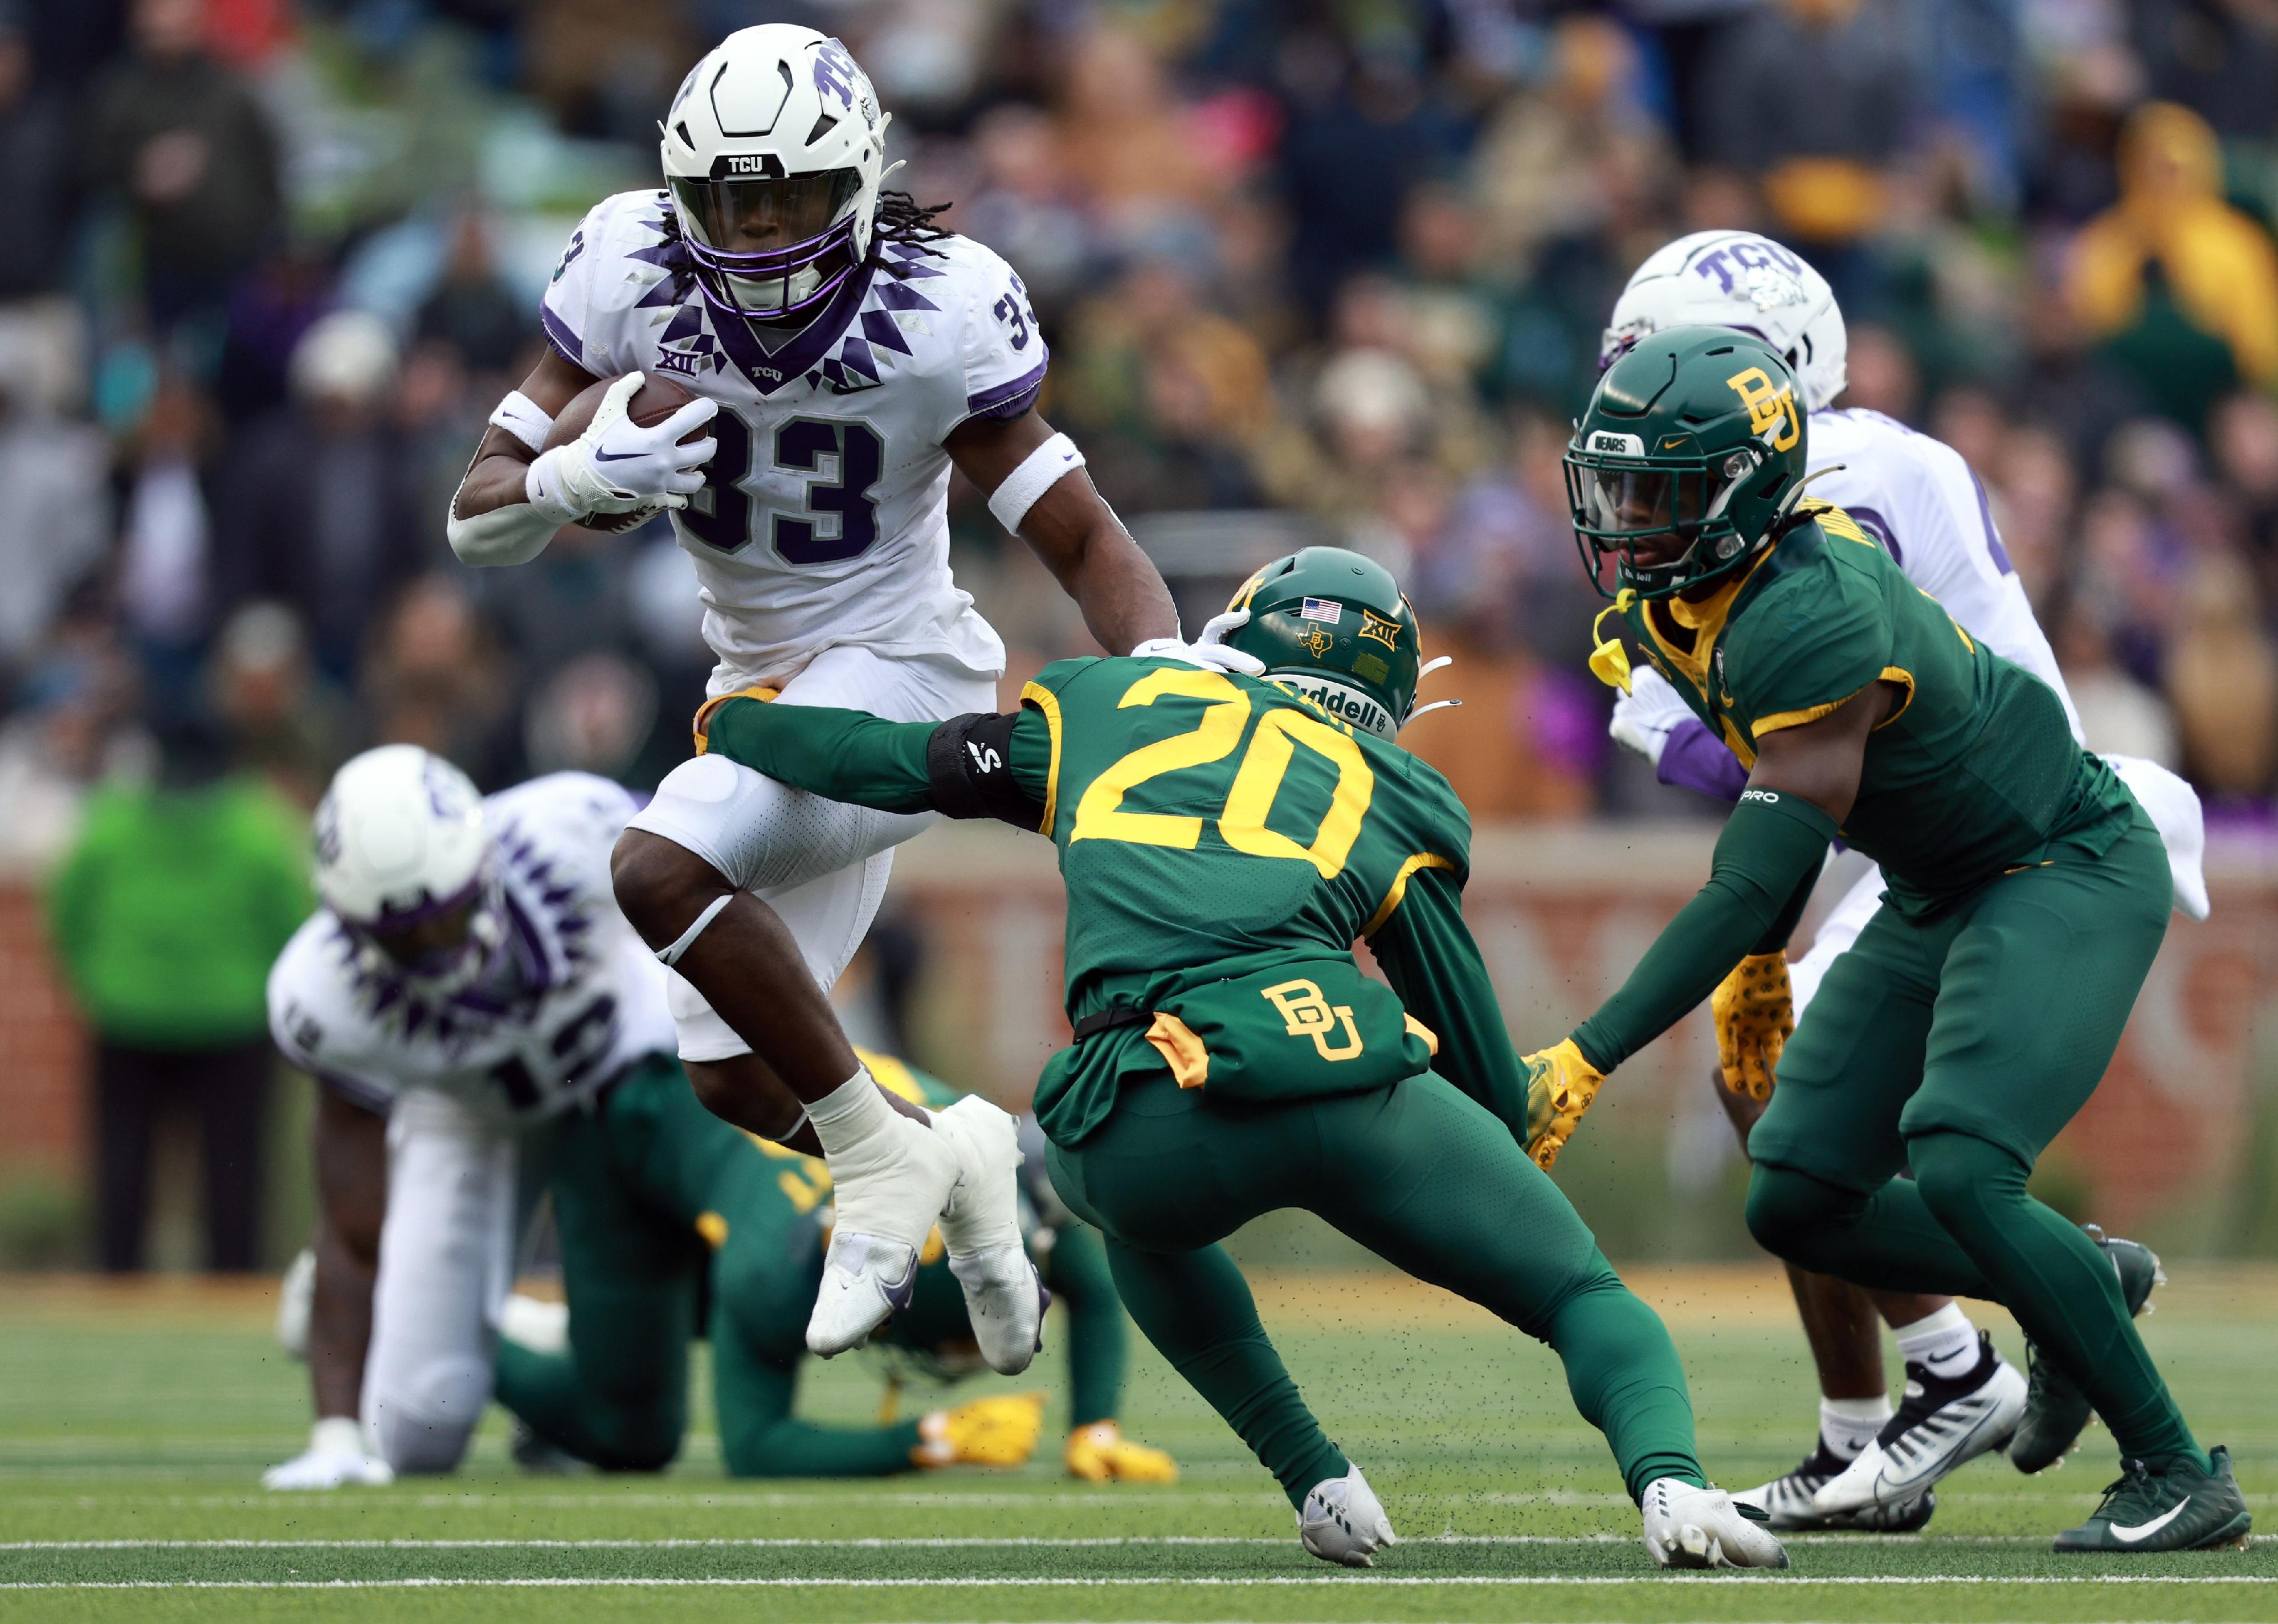 Running back Kendre Miller of the TCU Horned Frogs carries the ball against Baylor players.